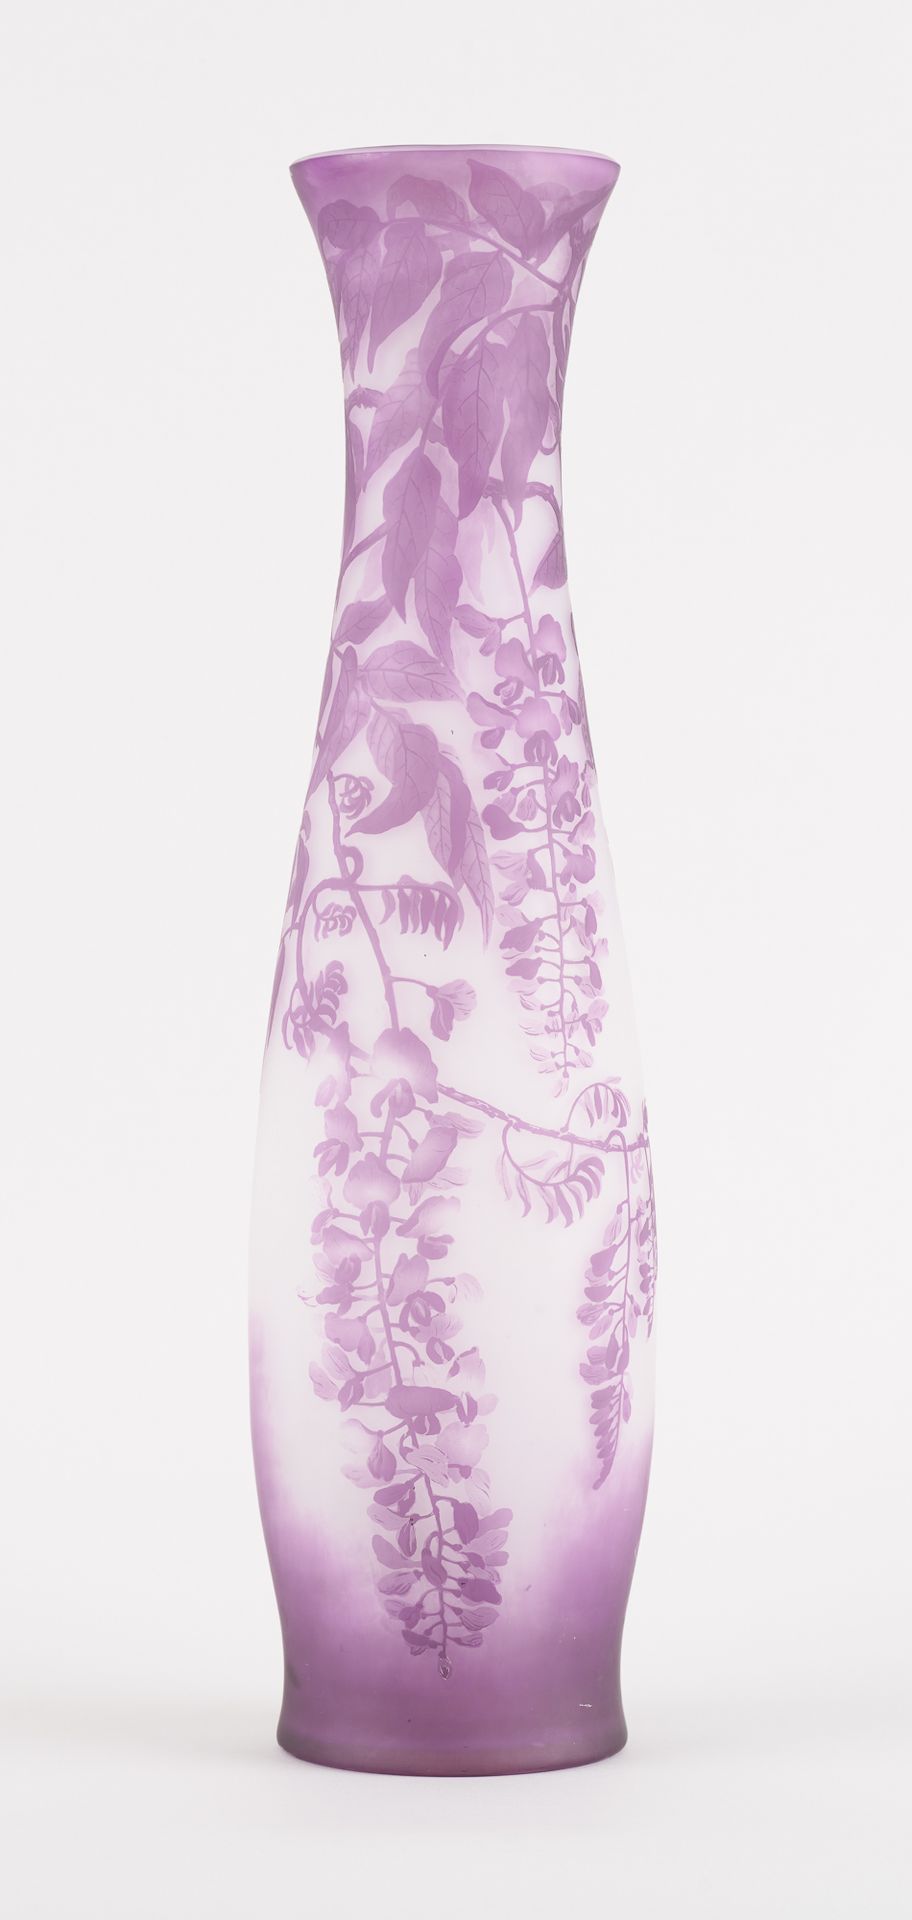 VAL SAINT LAMBERT. Glassware: Vase in lined glass with wisteria decoration.

Mon&hellip;